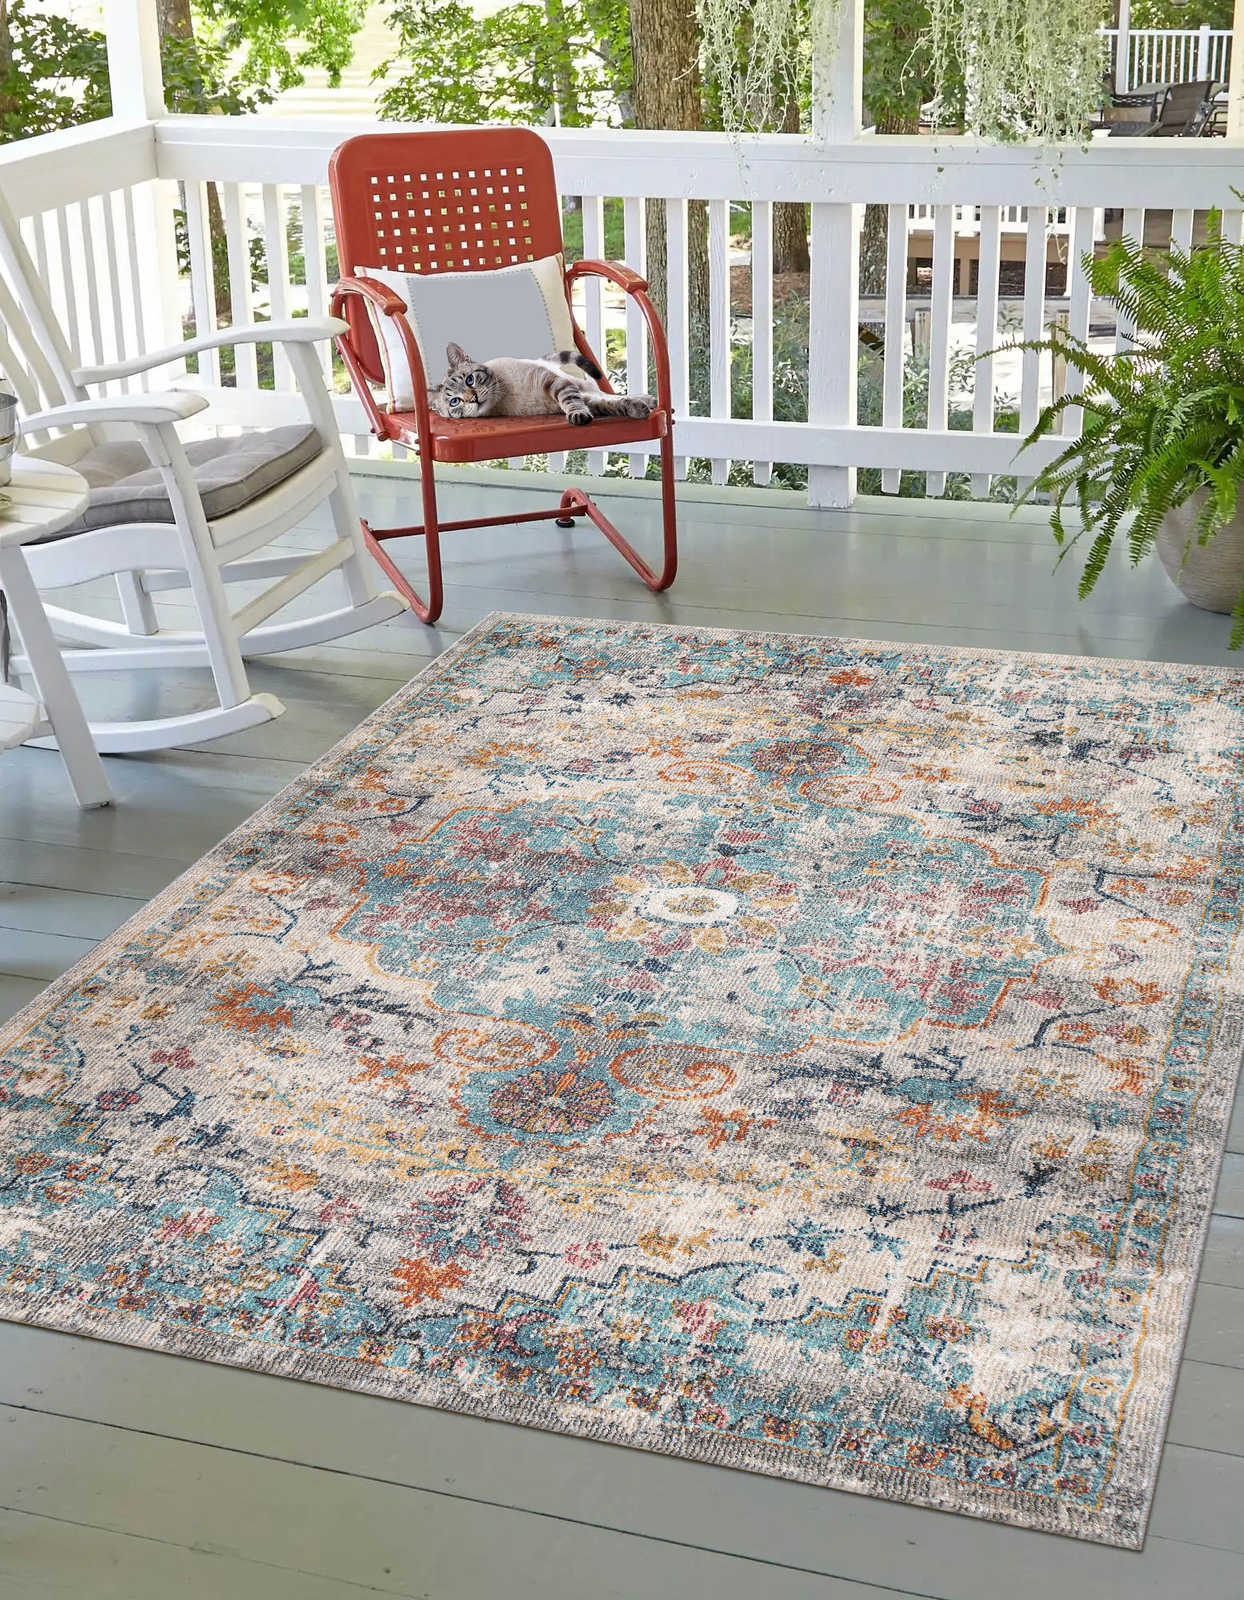 Easy Care Outdoor Rug Colourful - 150 x 80 cm
